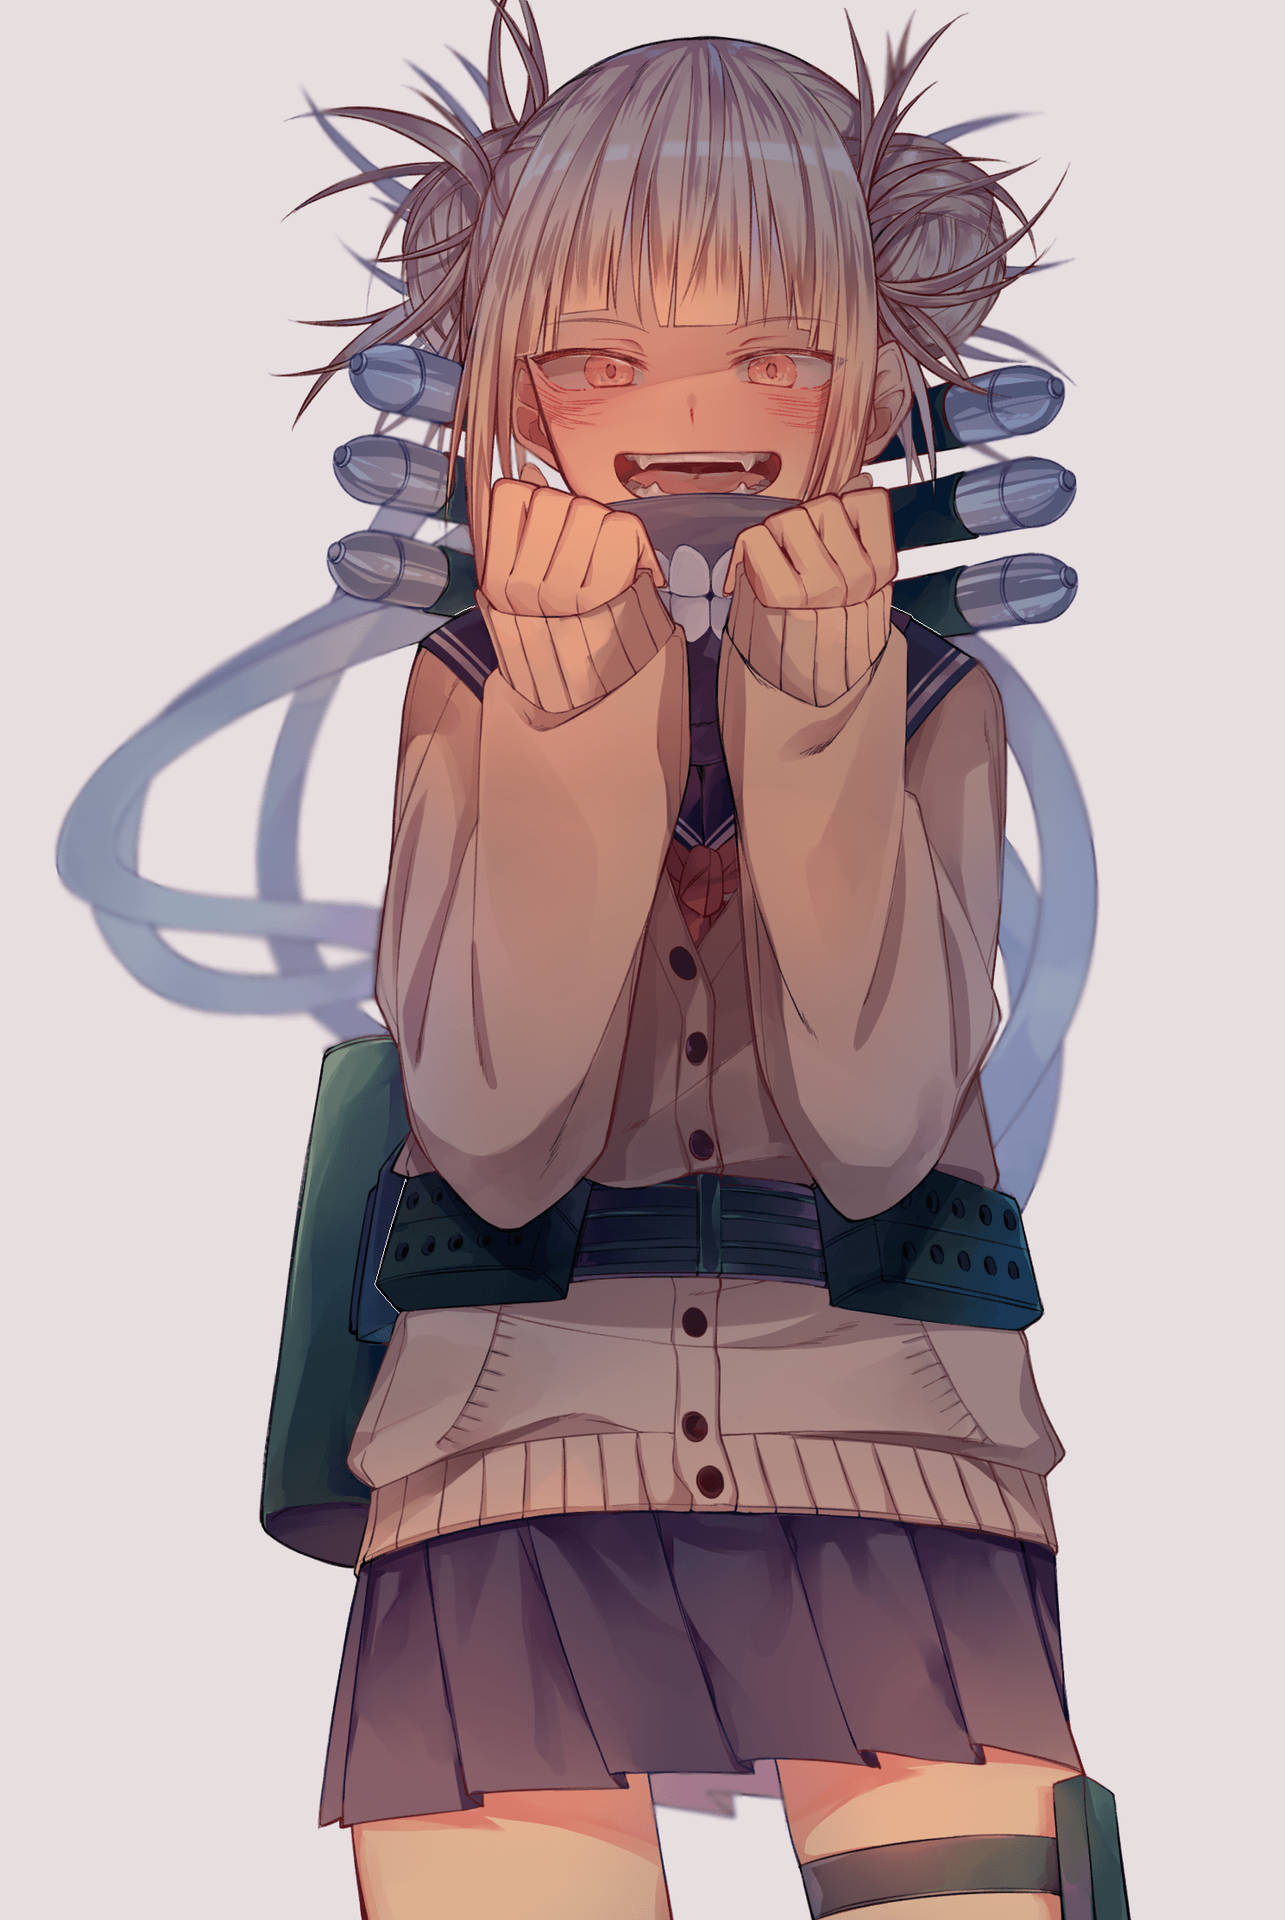 Himiko Toga With Weapons Background